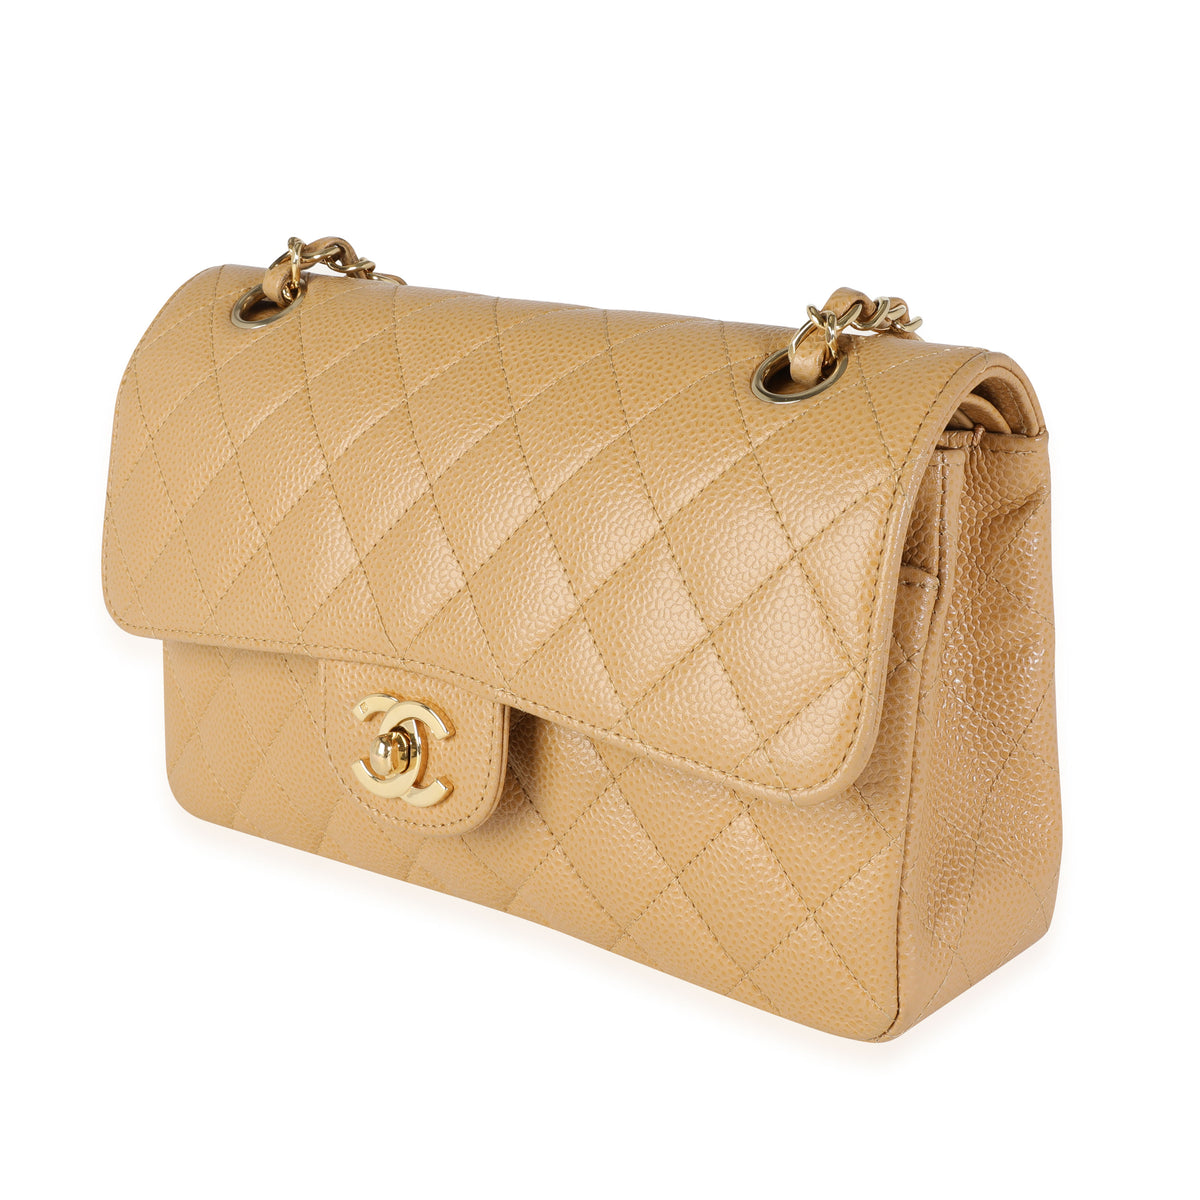 Chanel Beige Quilted Lambskin Double Sided Classic Flap Small Q6B0N91II1004